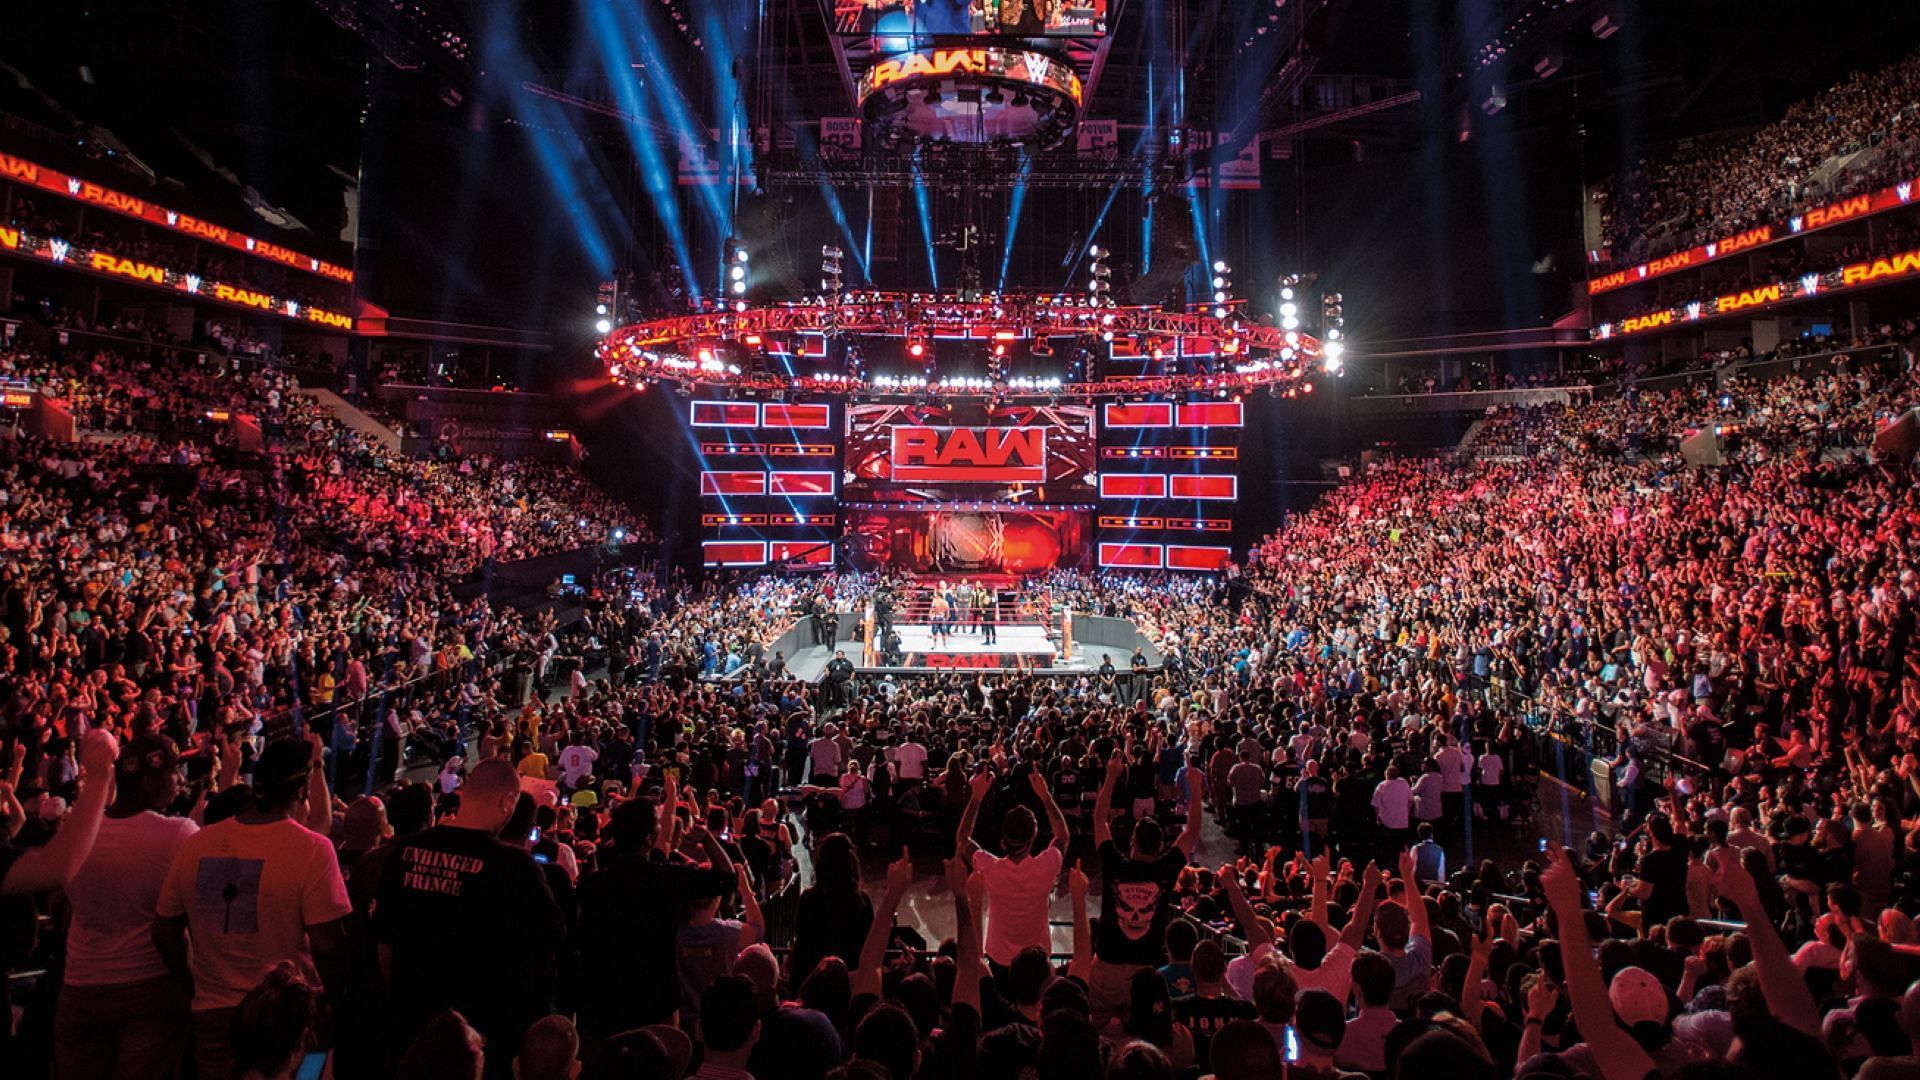 The WWE RAW ring and stage/set on display inside arena